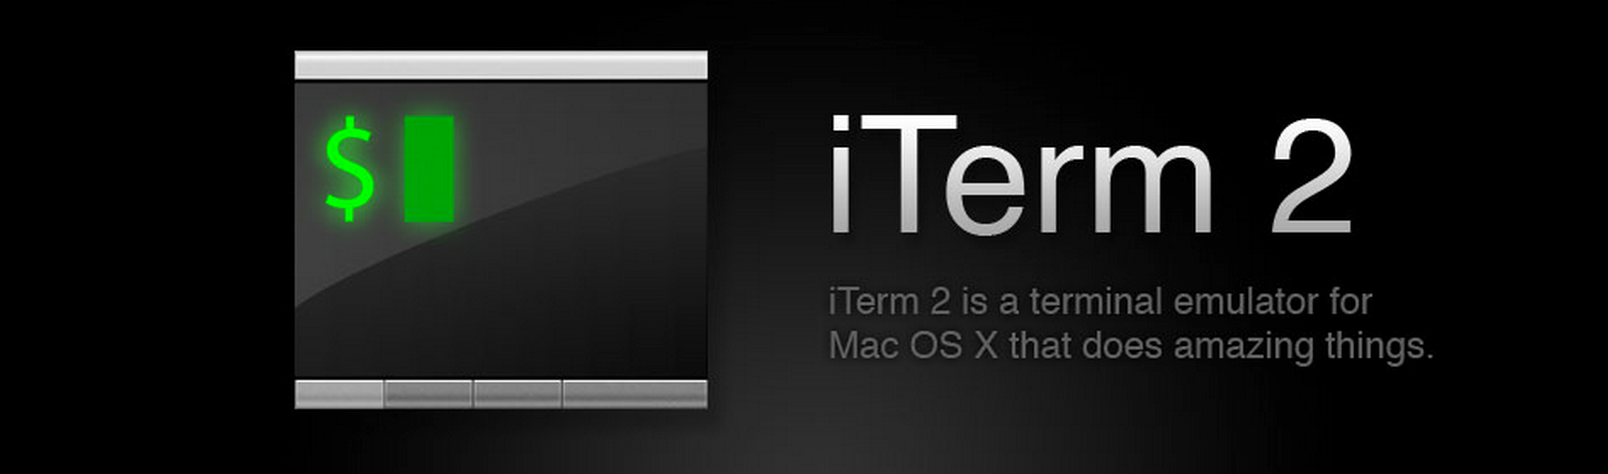 Download iterm2 for windows